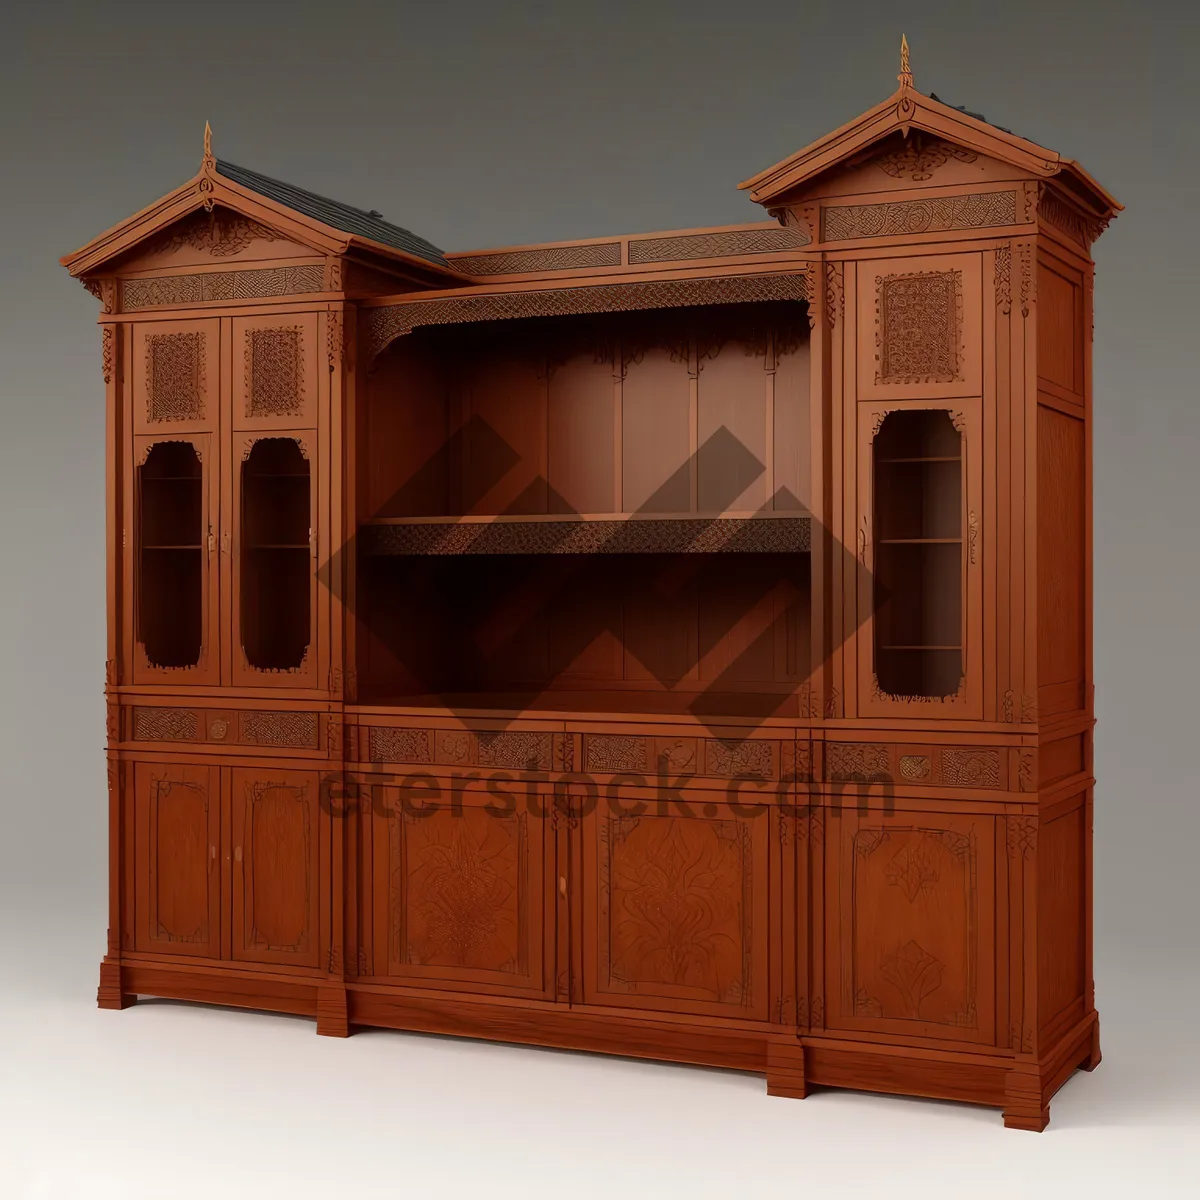 Picture of Vintage Wooden Entertainment Center for Home Interior Design